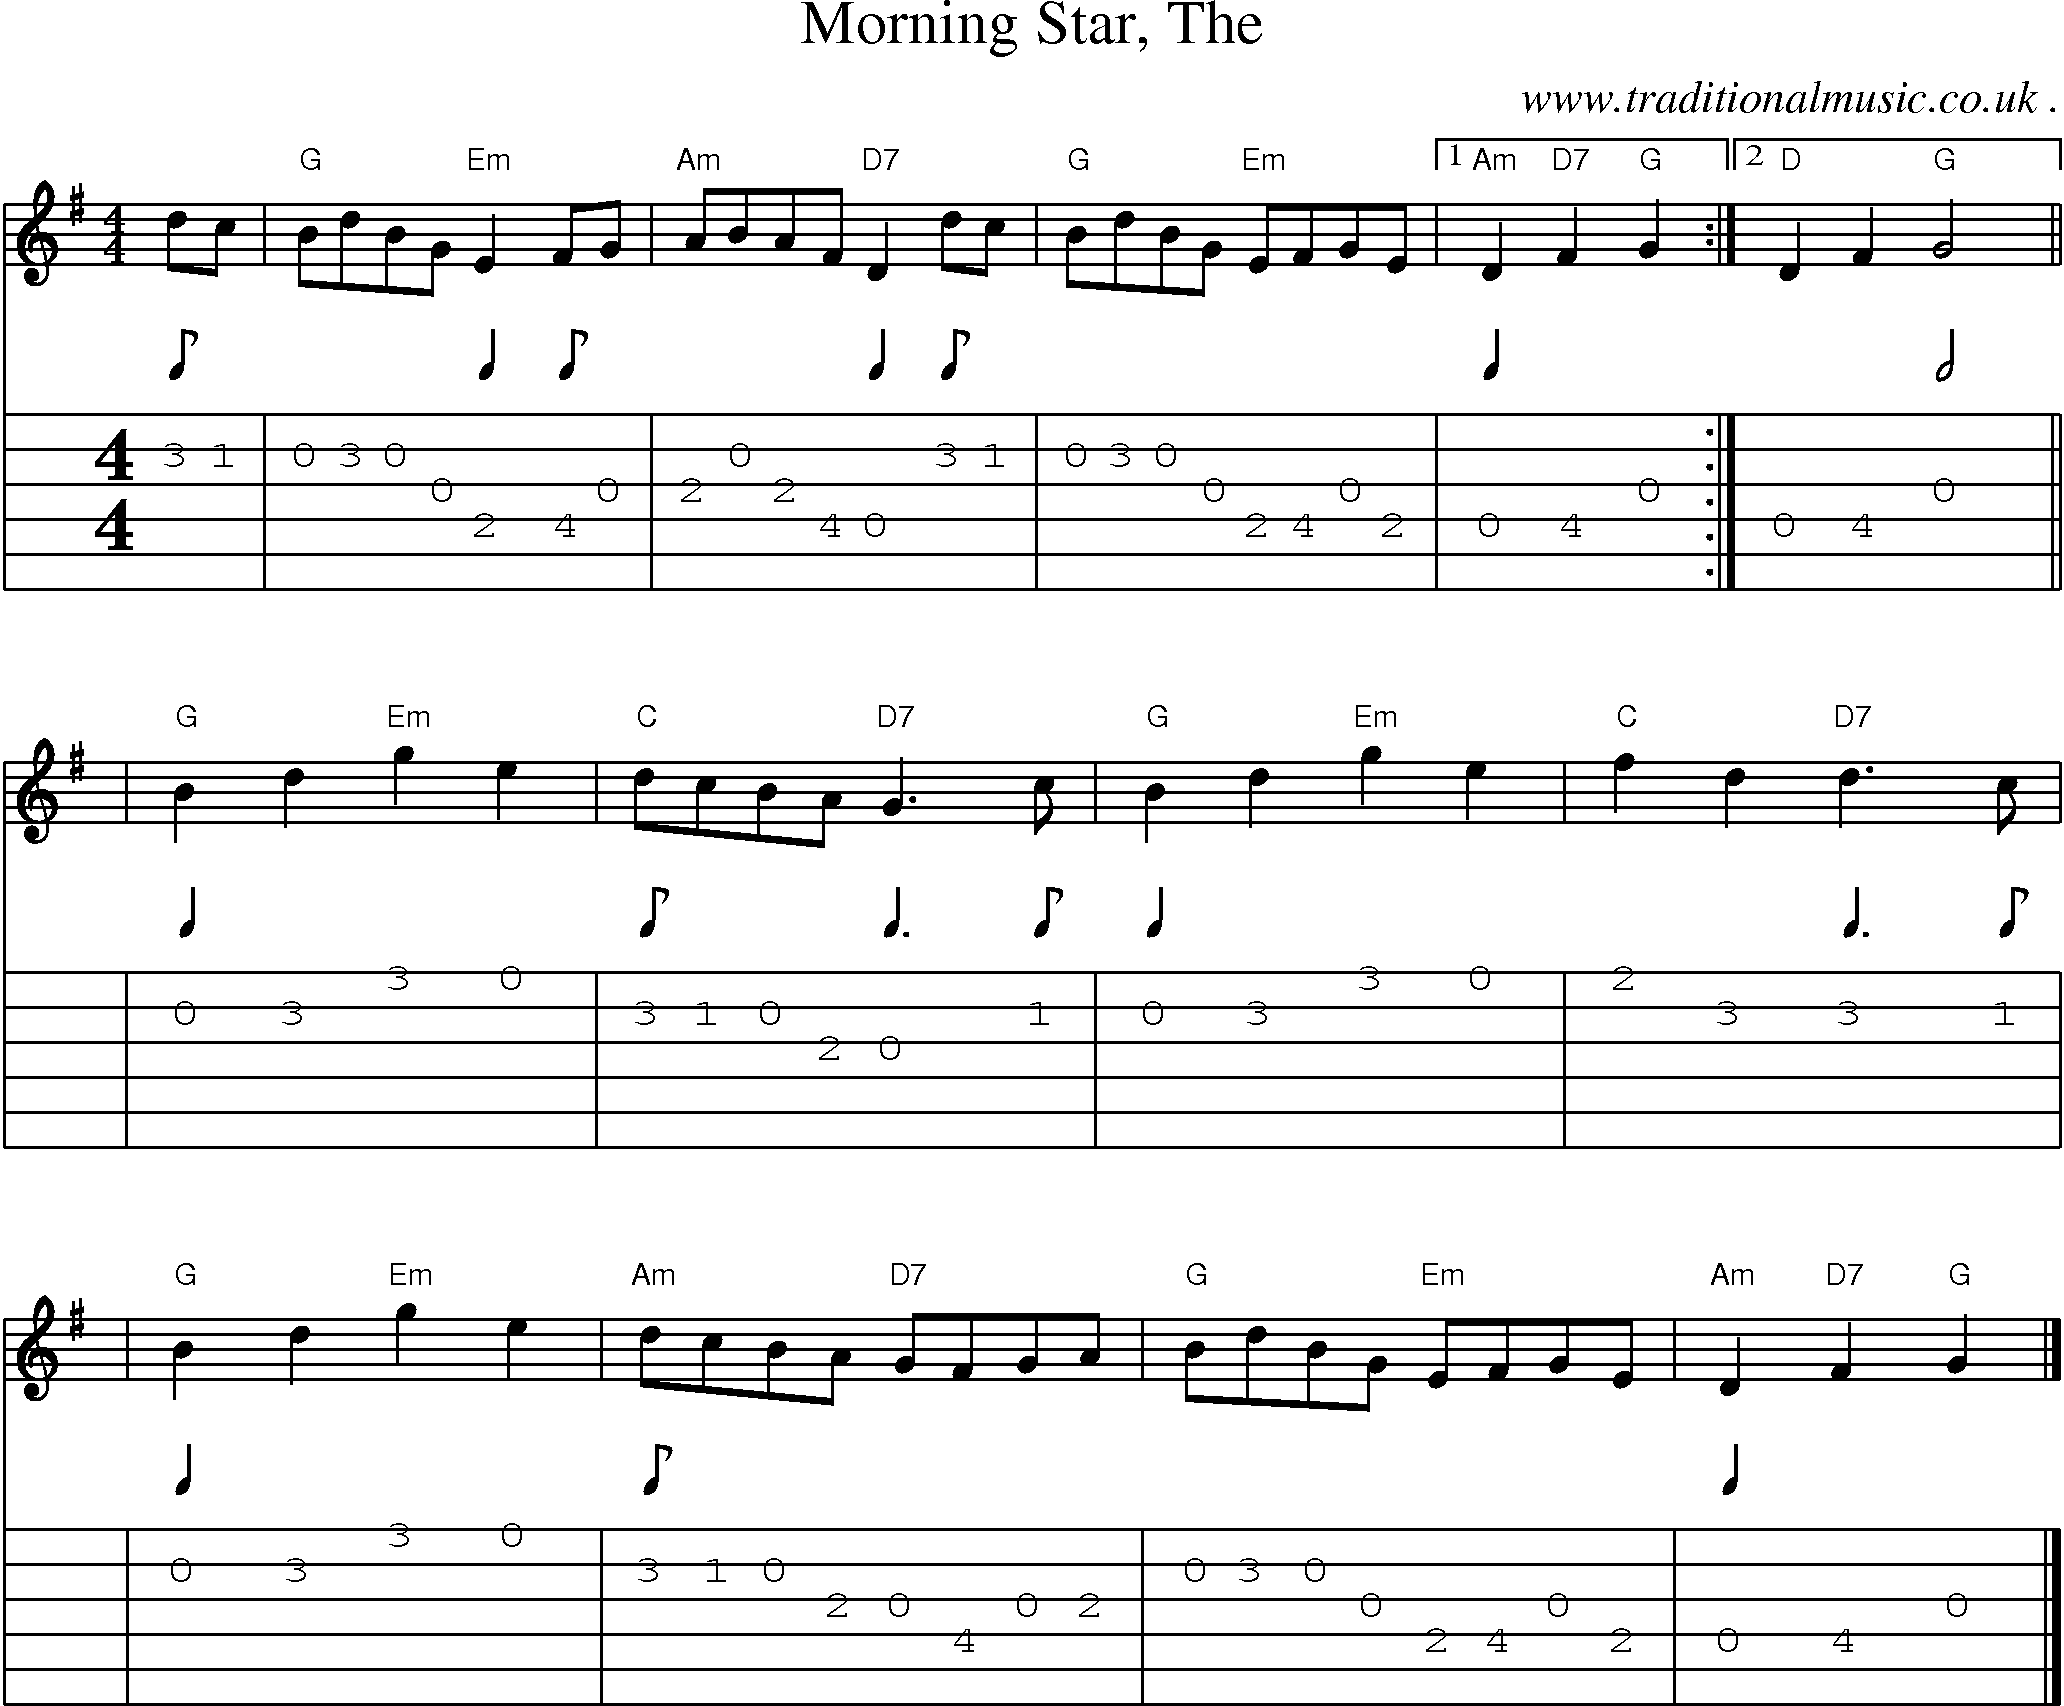 Music Score and Guitar Tabs for Morning Star The